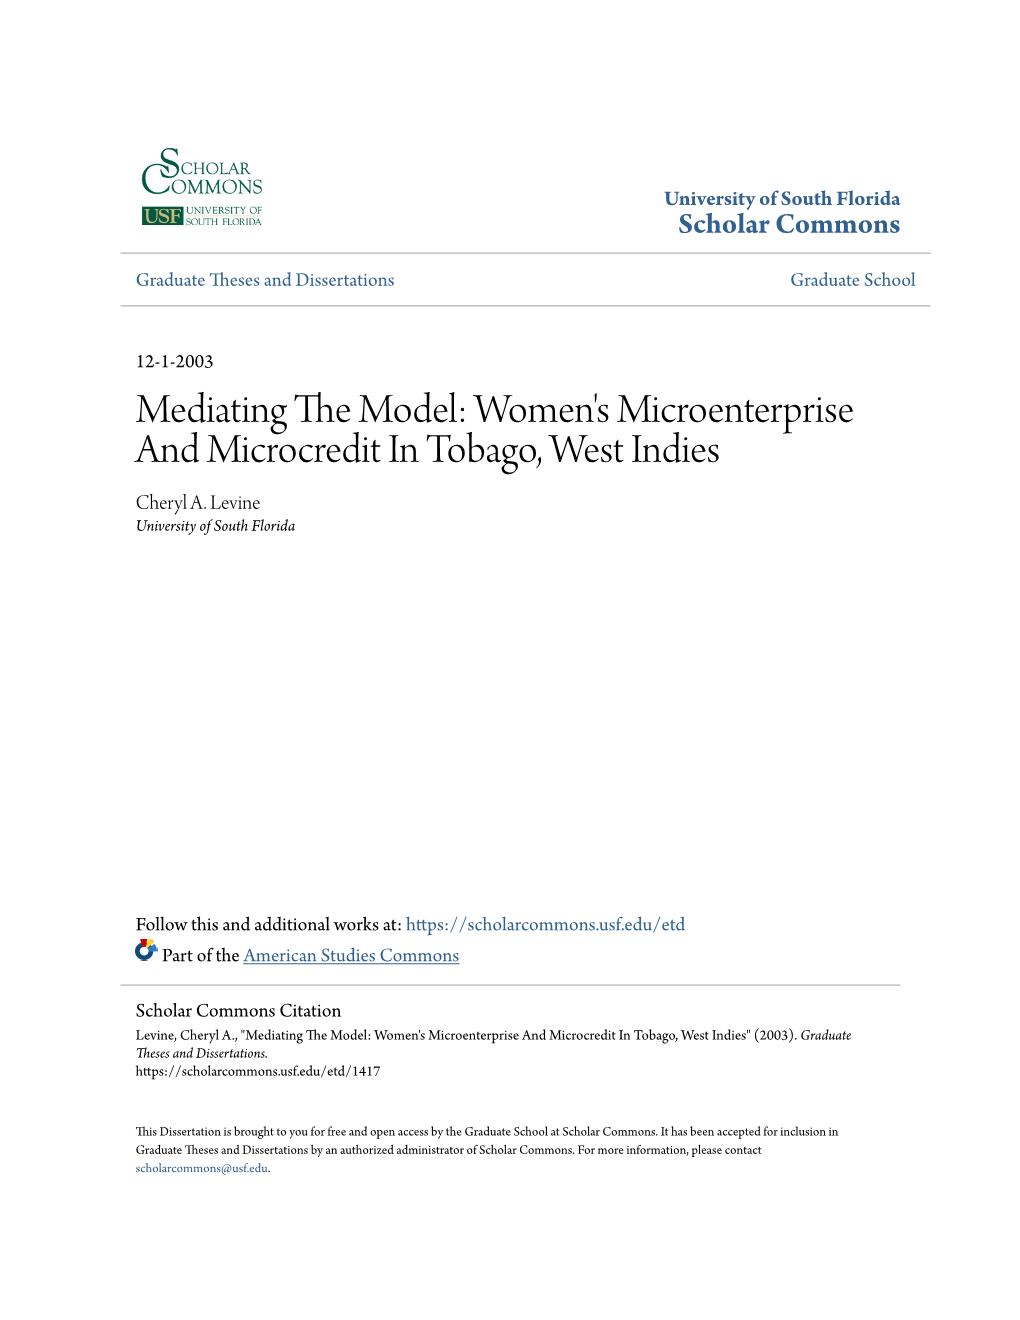 Women's Microenterprise and Microcredit in Tobago, West Indies Cheryl A